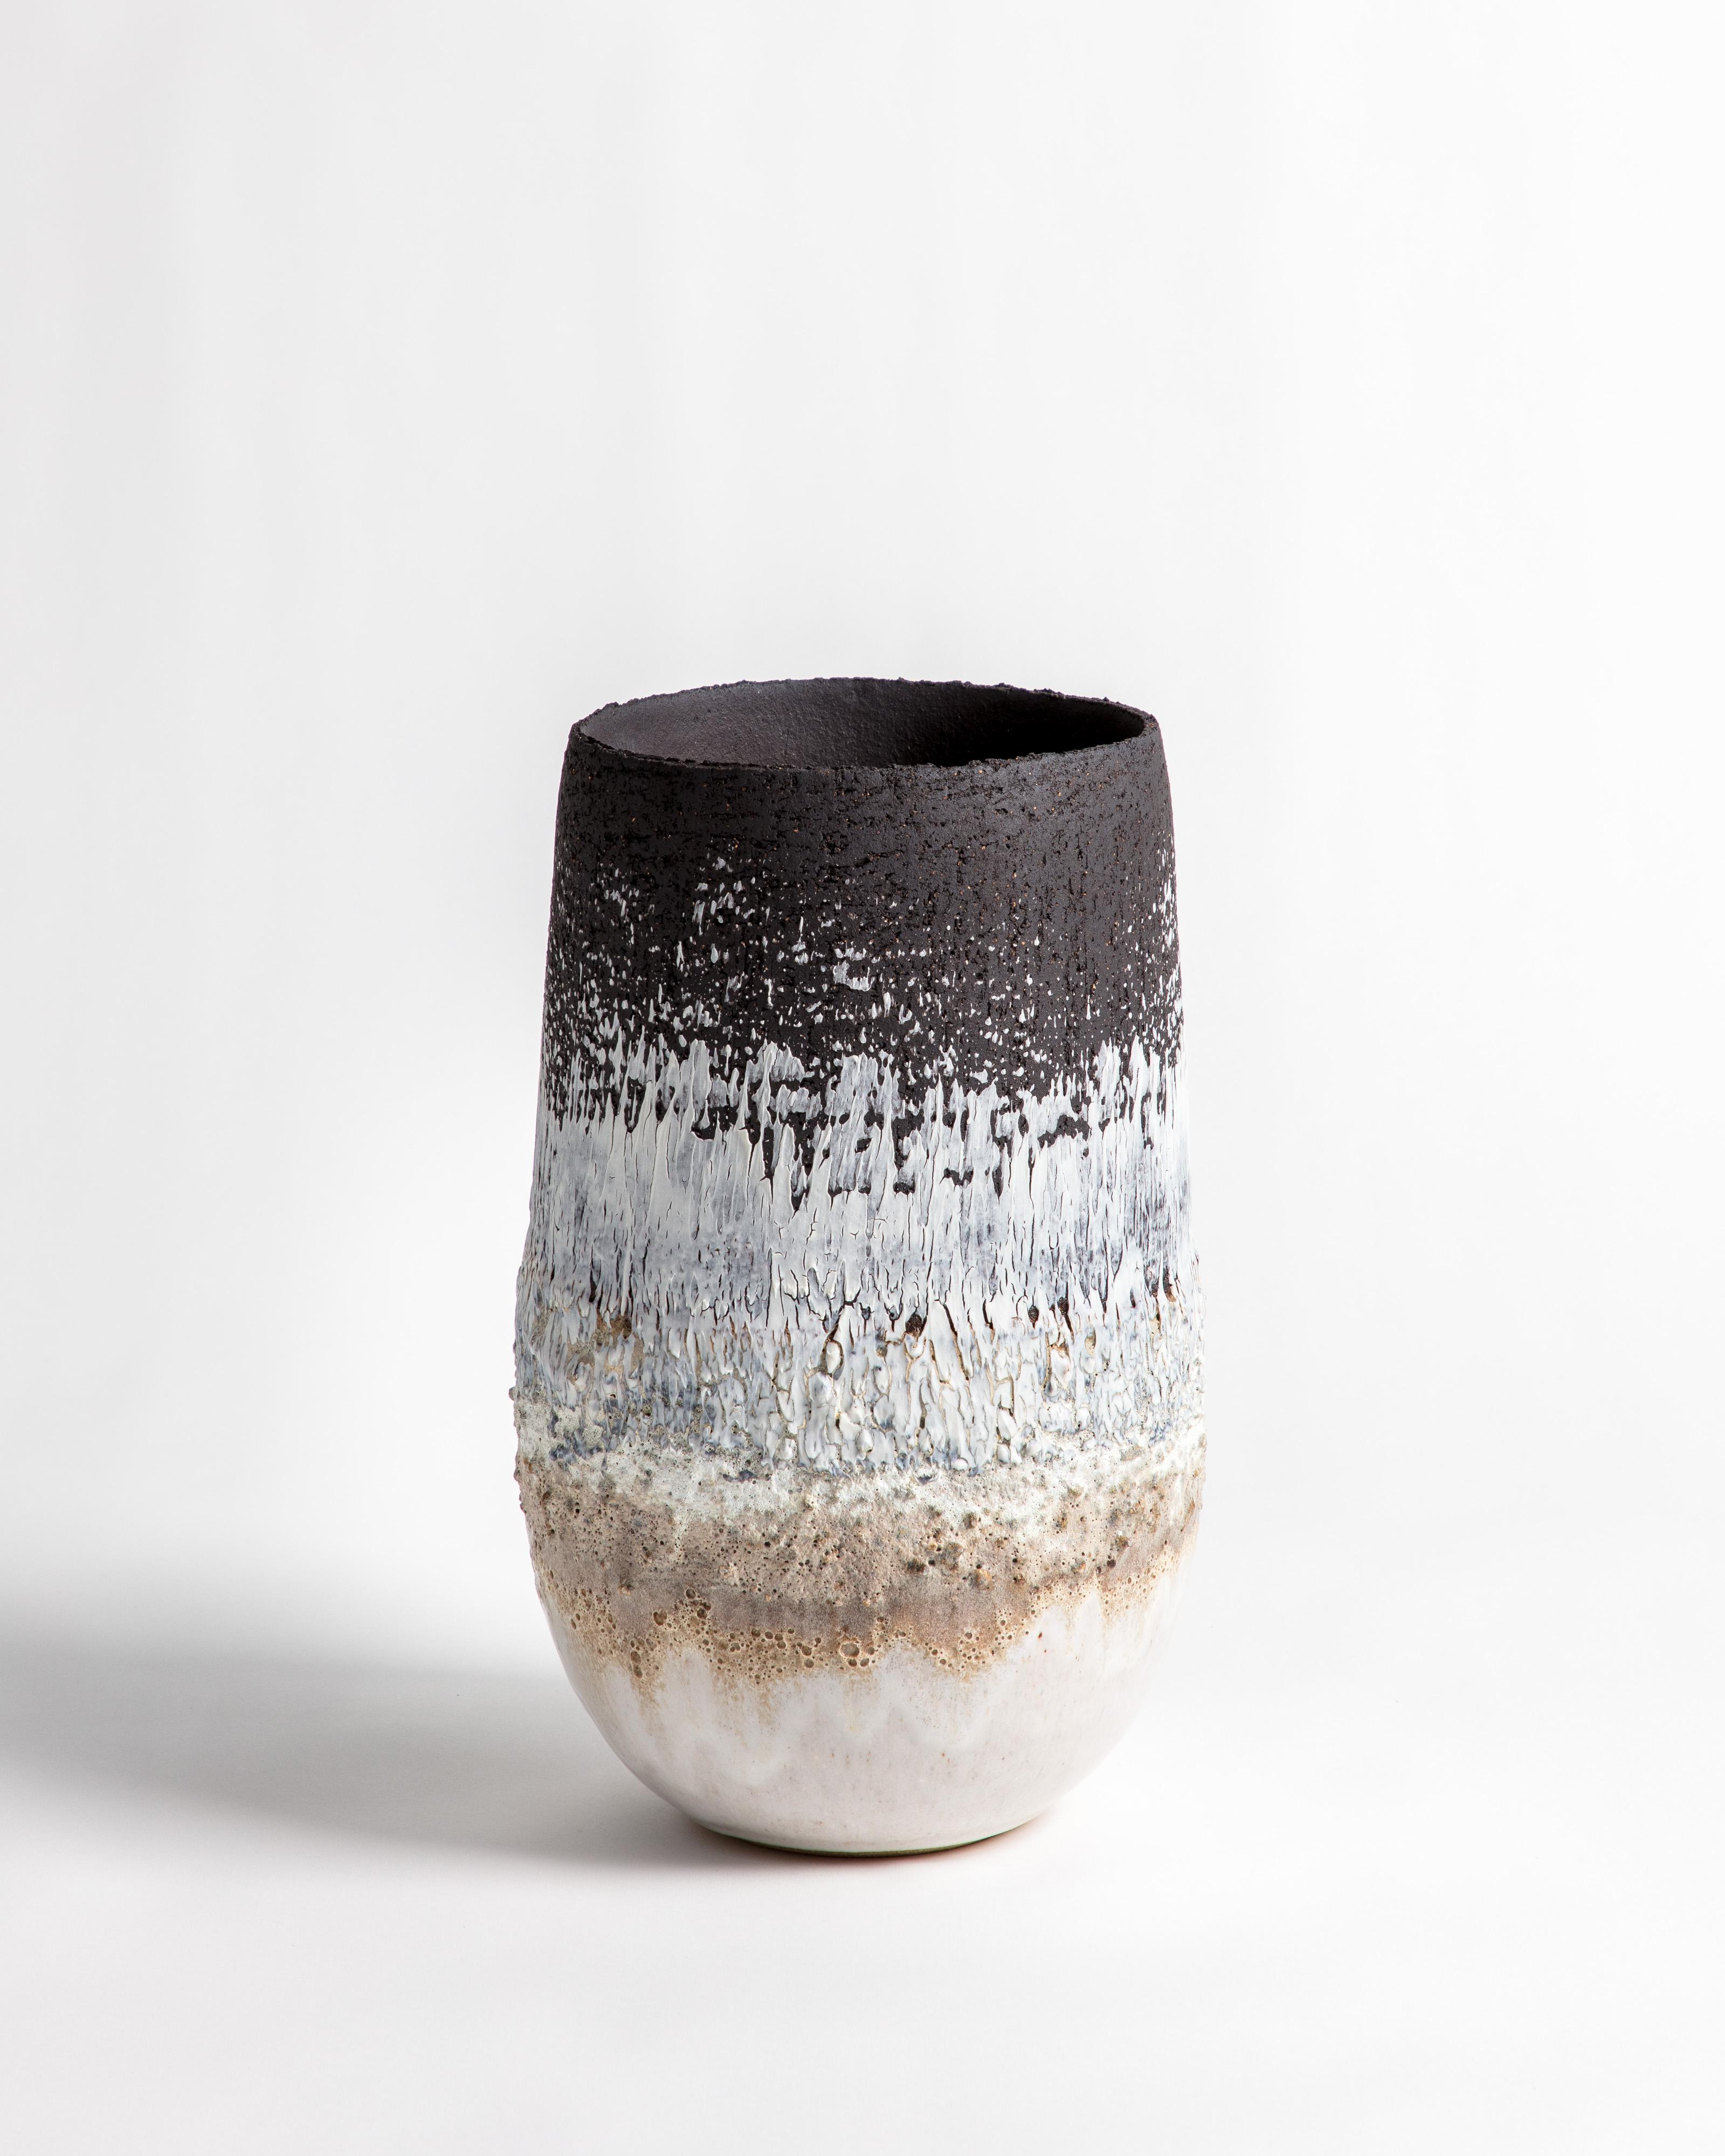 A heavily textured volcanic open shaped vessel with black and white glaze and markings. Made from black textured stoneware clay and porcelain engobe.

Inspiration for the piece comes from the clay itself and the chemical relationships that glaze and